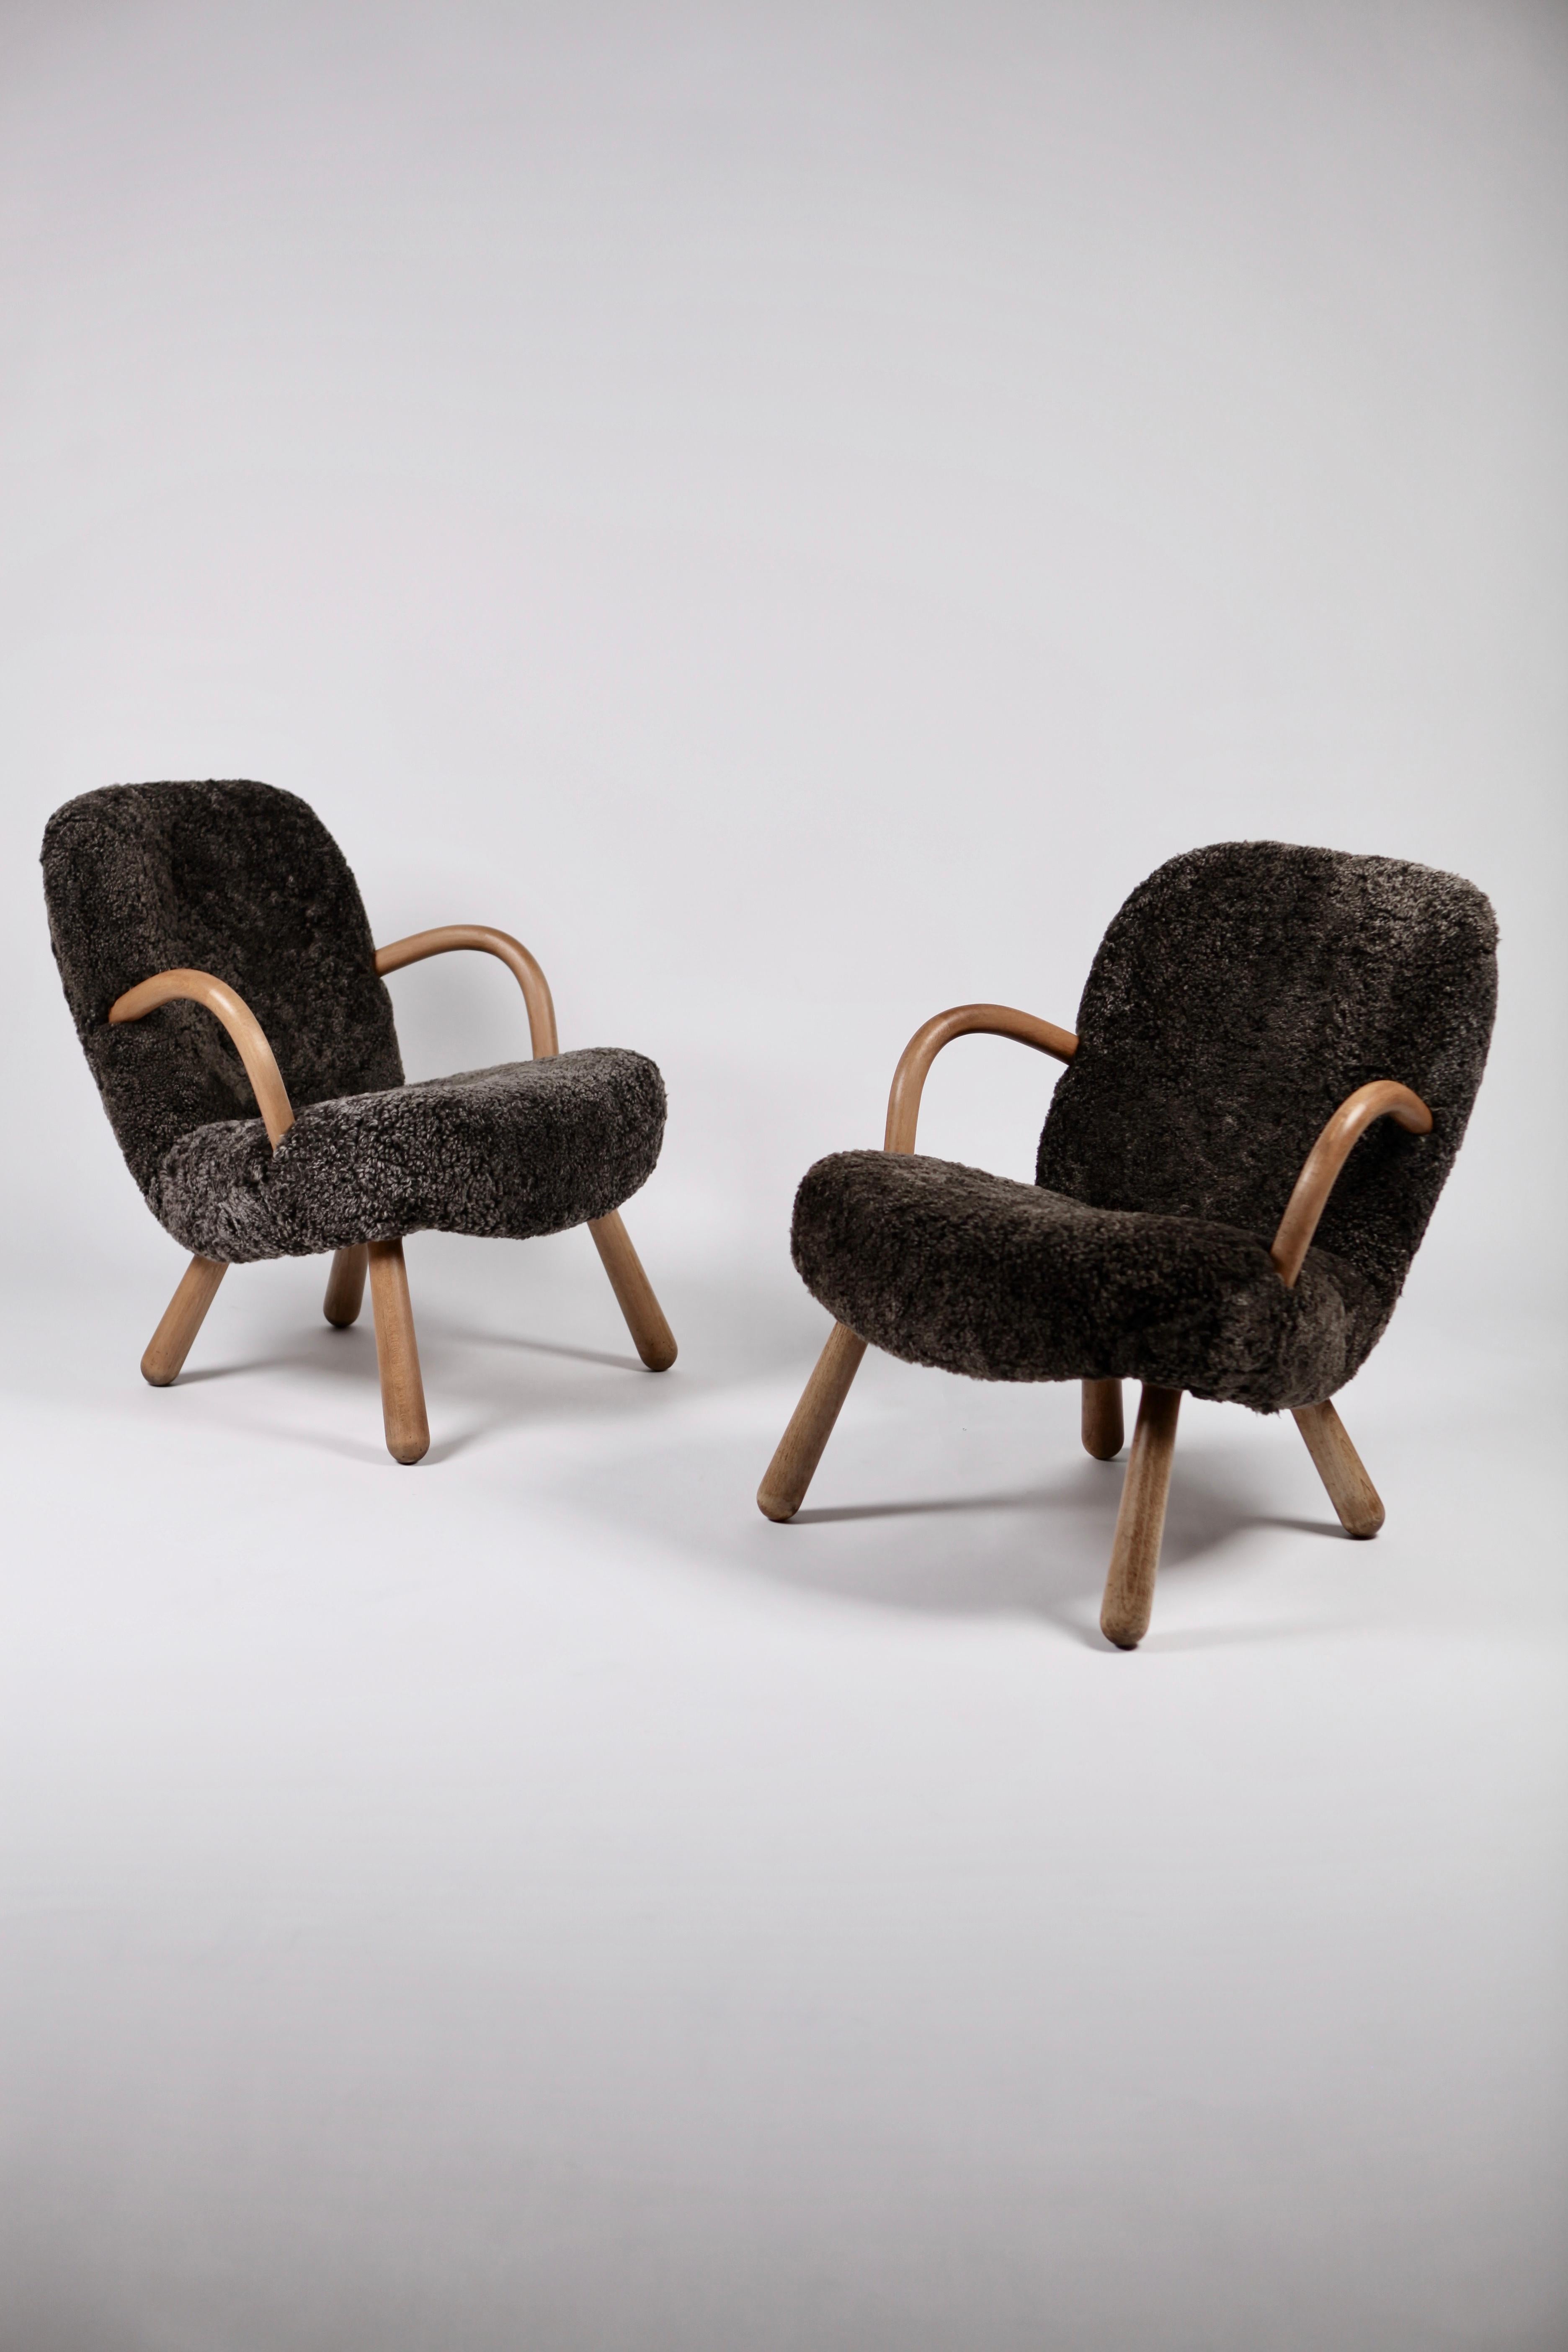 Mid-20th Century Pair of Philip Arctander Attributed Clam Chairs, 1950s